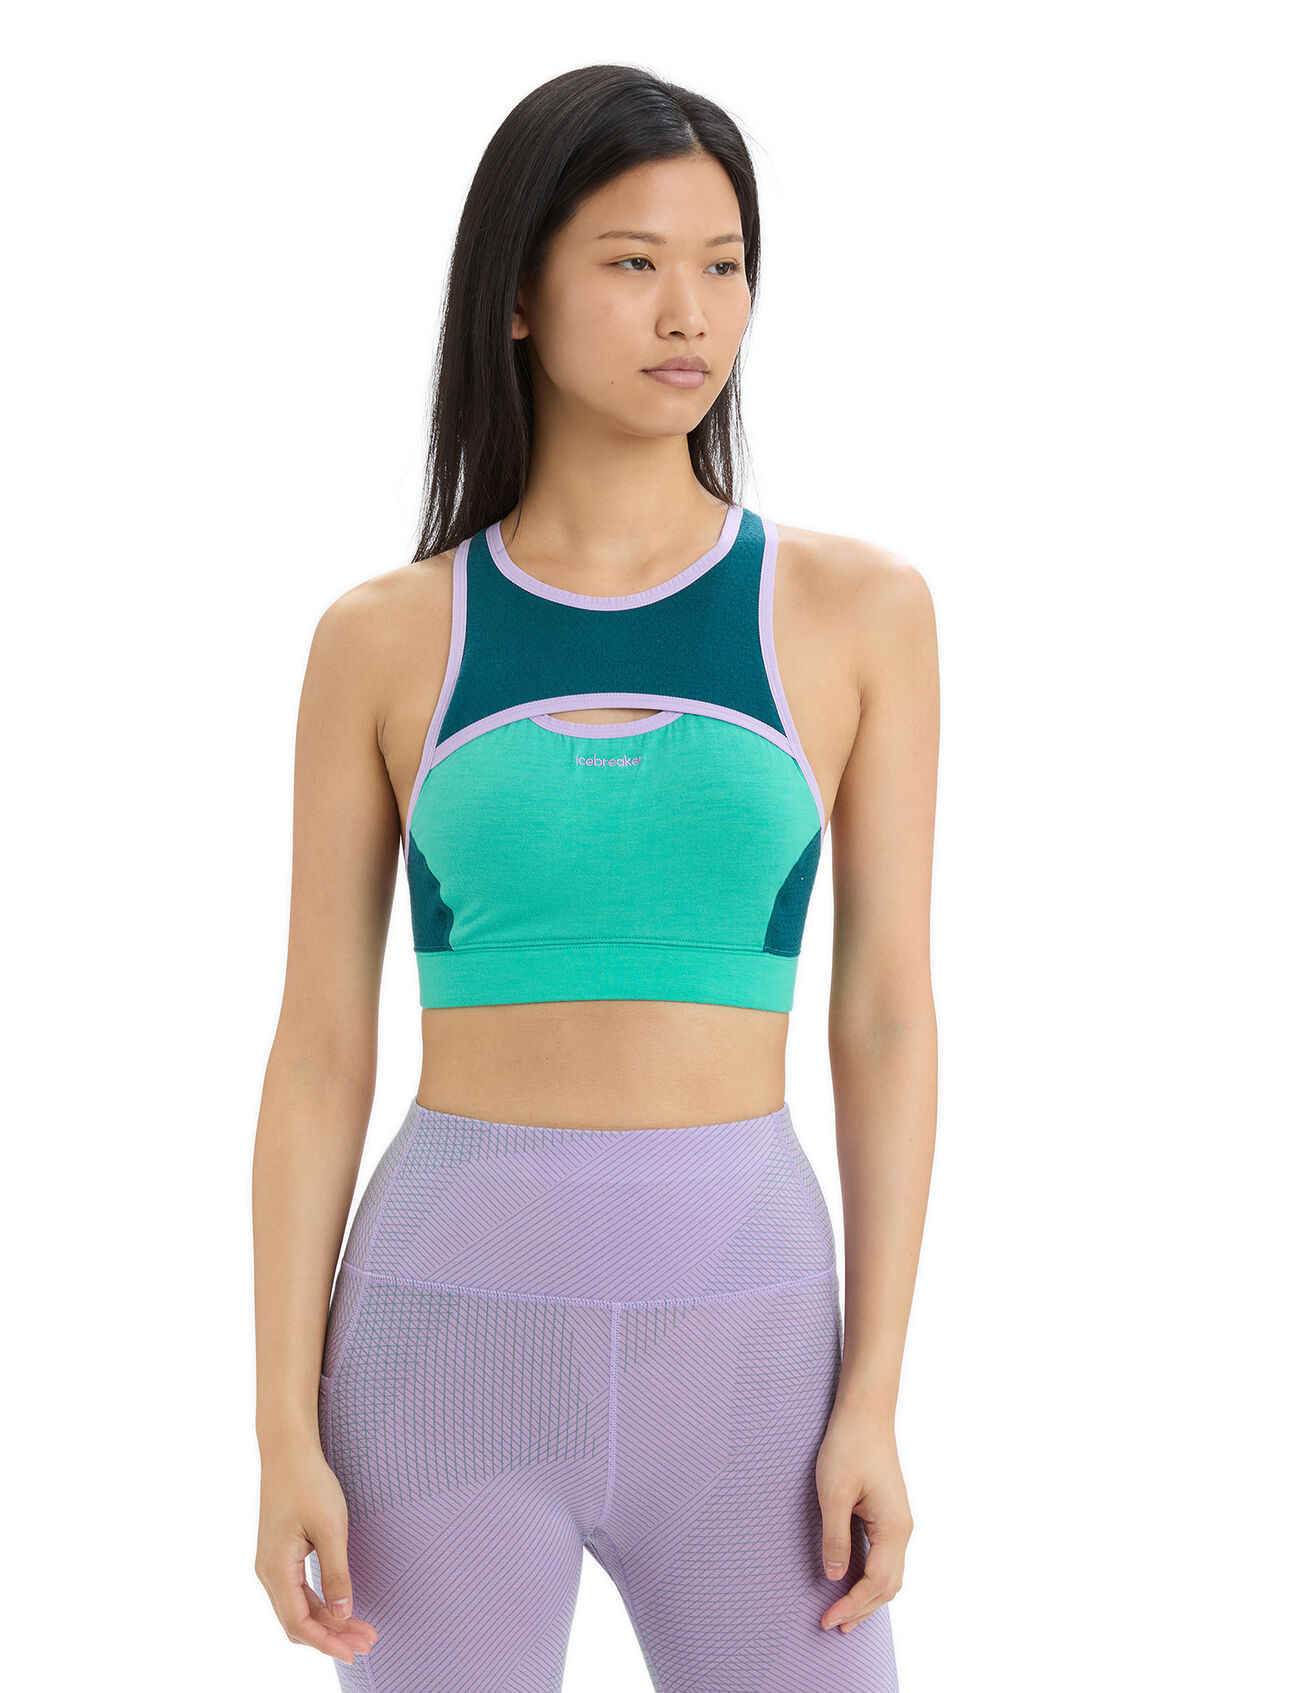 Womens ZoneKnit™ Merino Sport Bra A soft, supportive and highly technical bra that features body-mapped mesh panelling for superior ventilation, the Zoneknit™ Sport Bra helps regulate your body temperature when you're on the move.